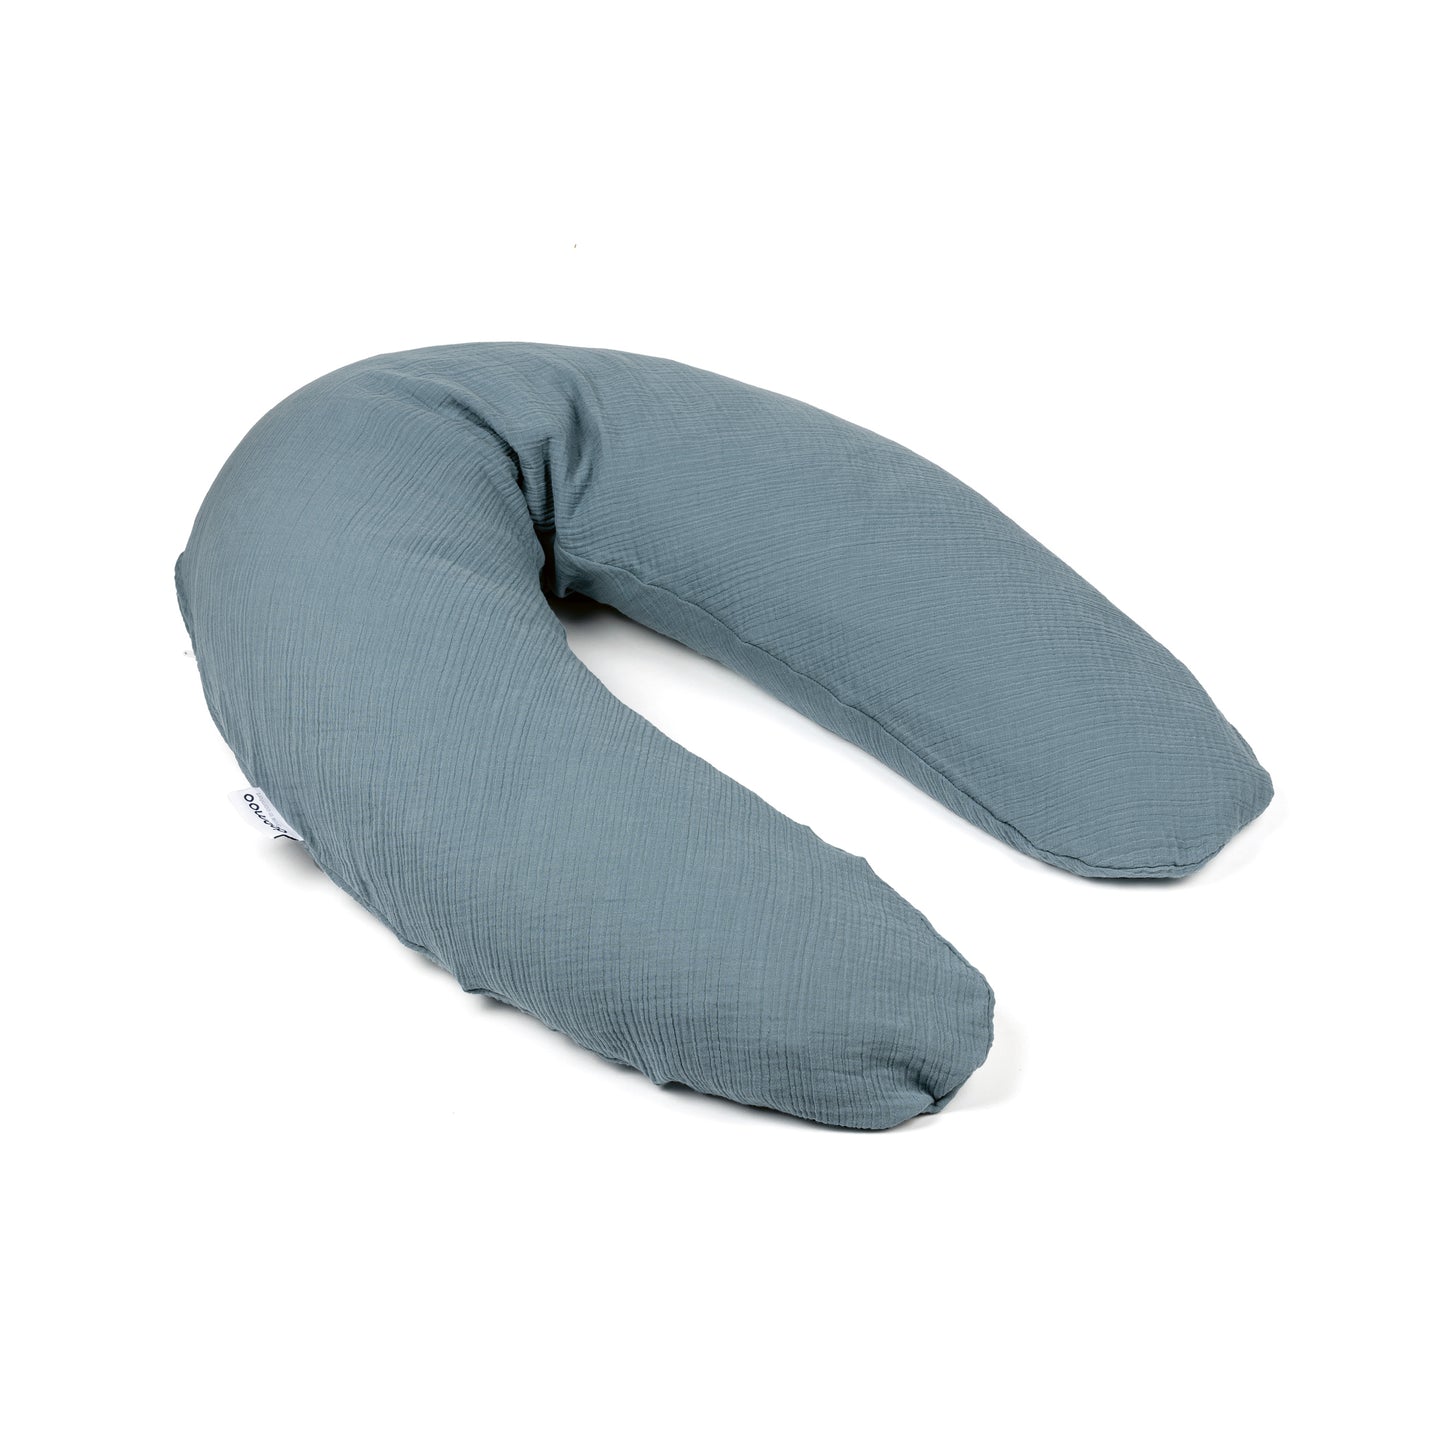 Large Blue pregnancy and breastfeeding pillow